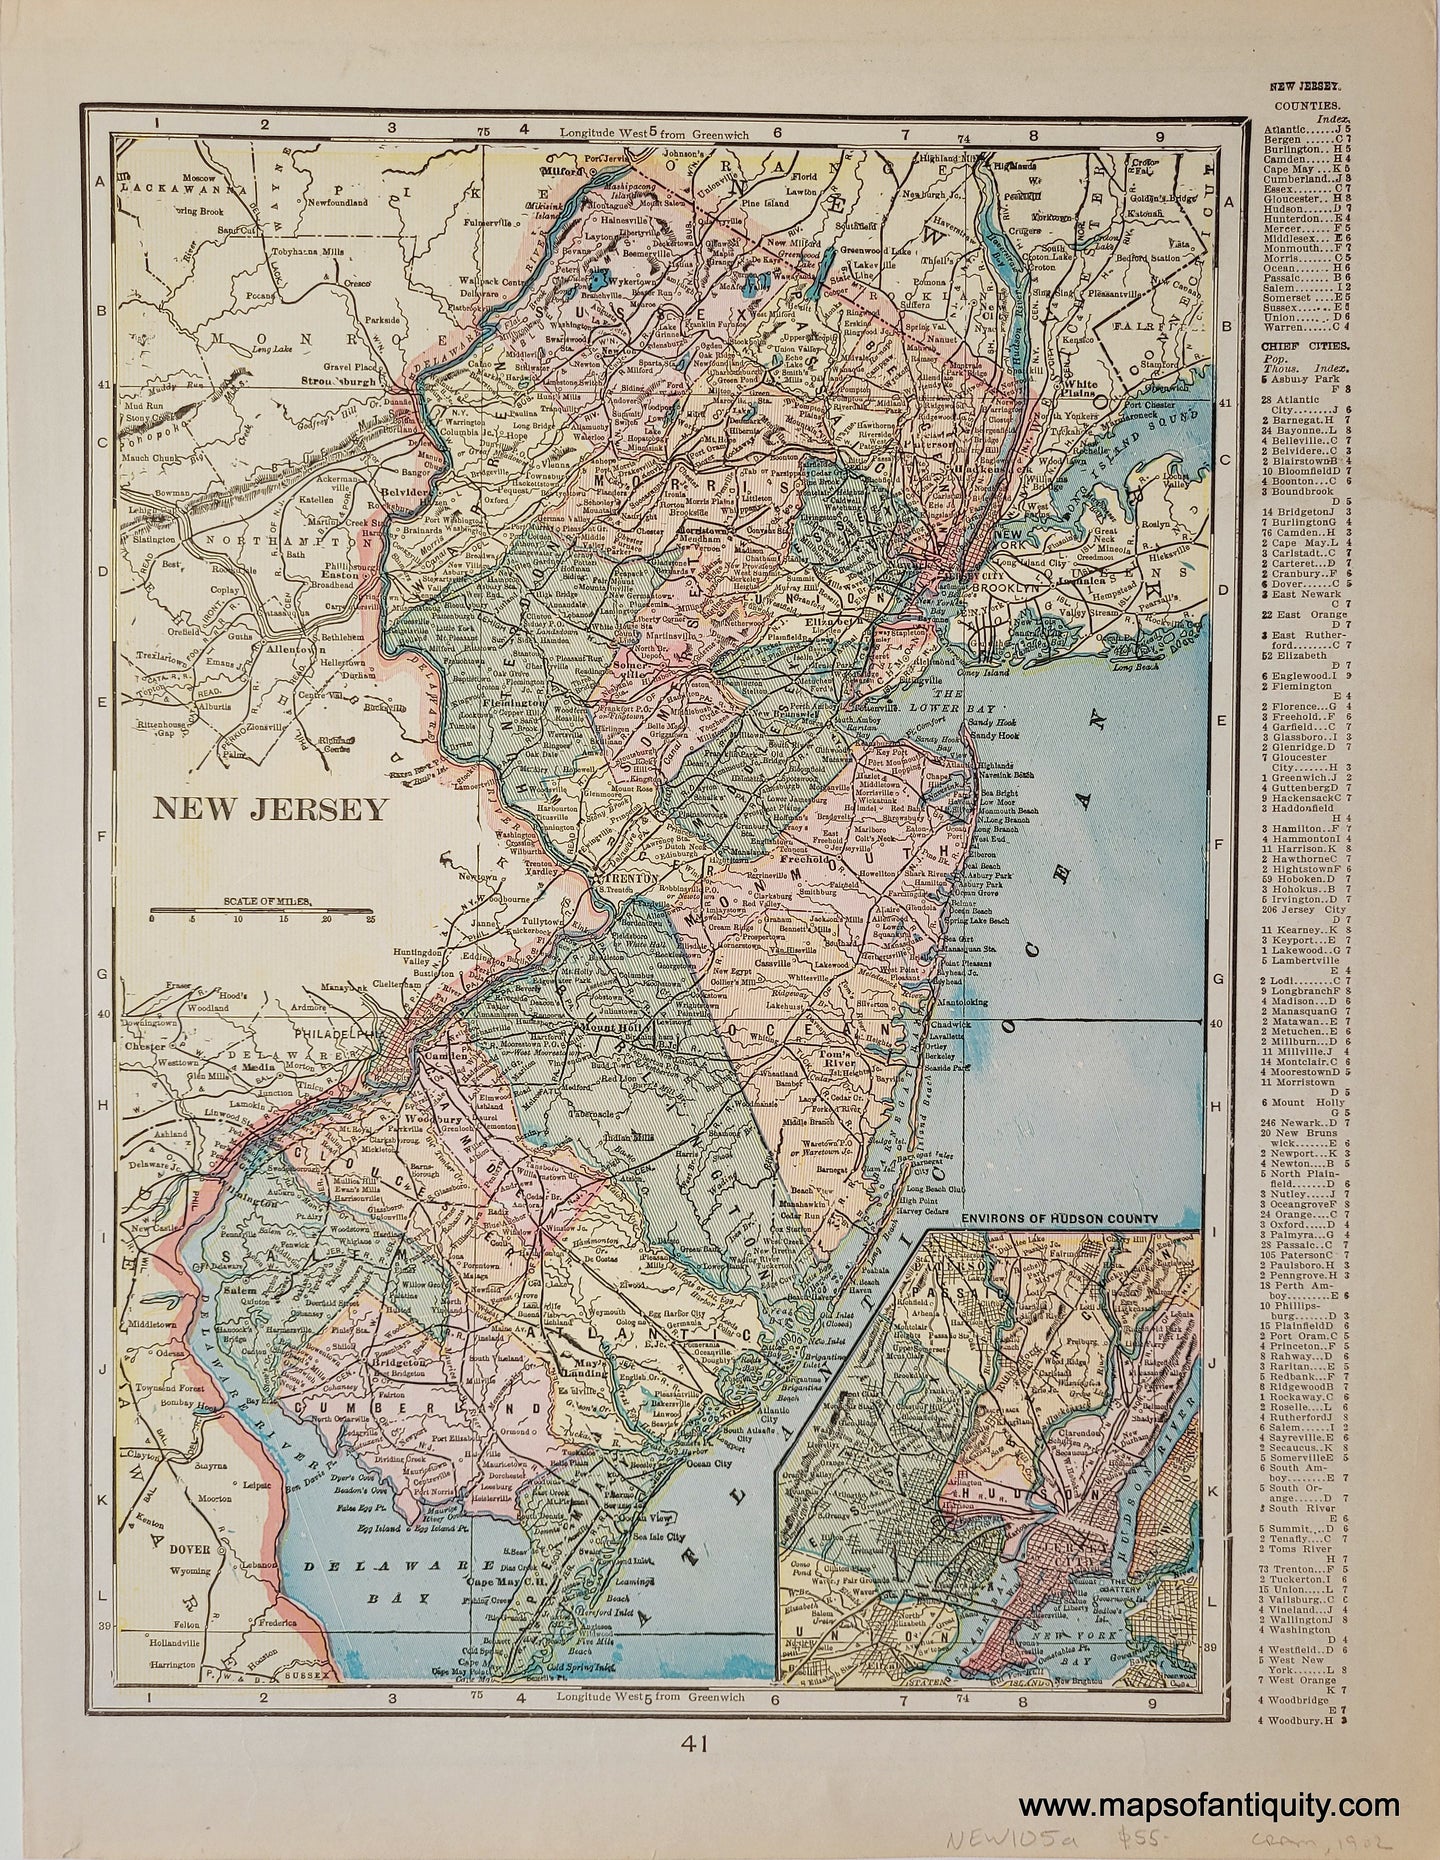 Antique map with vibrant original printed color New Jersey by Cram, 1902.